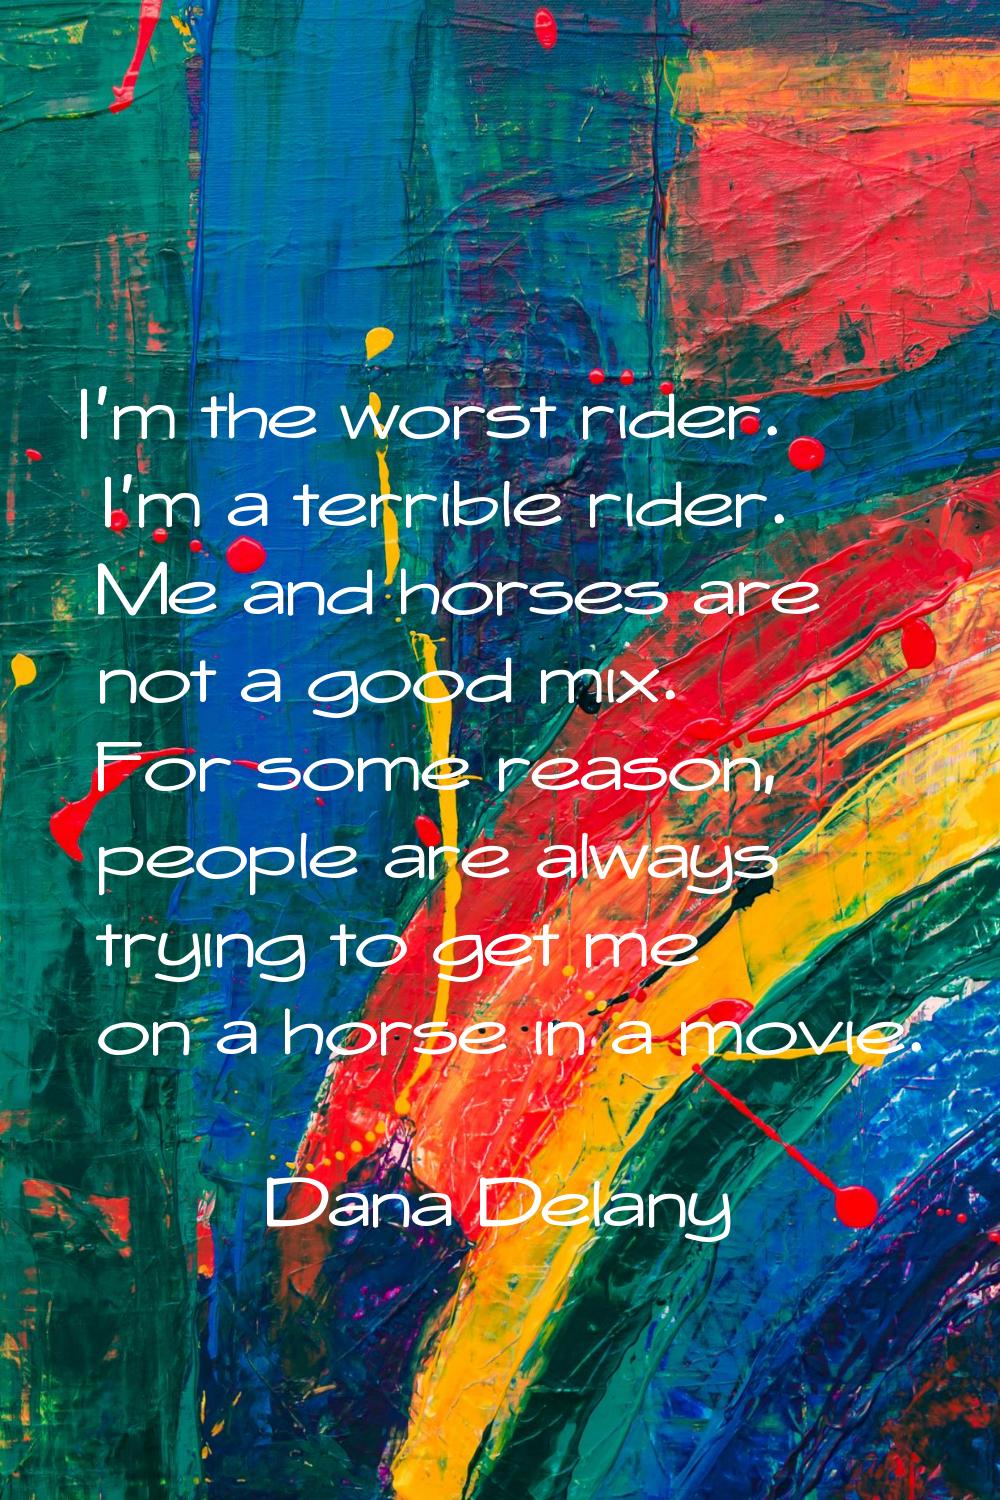 I'm the worst rider. I'm a terrible rider. Me and horses are not a good mix. For some reason, peopl